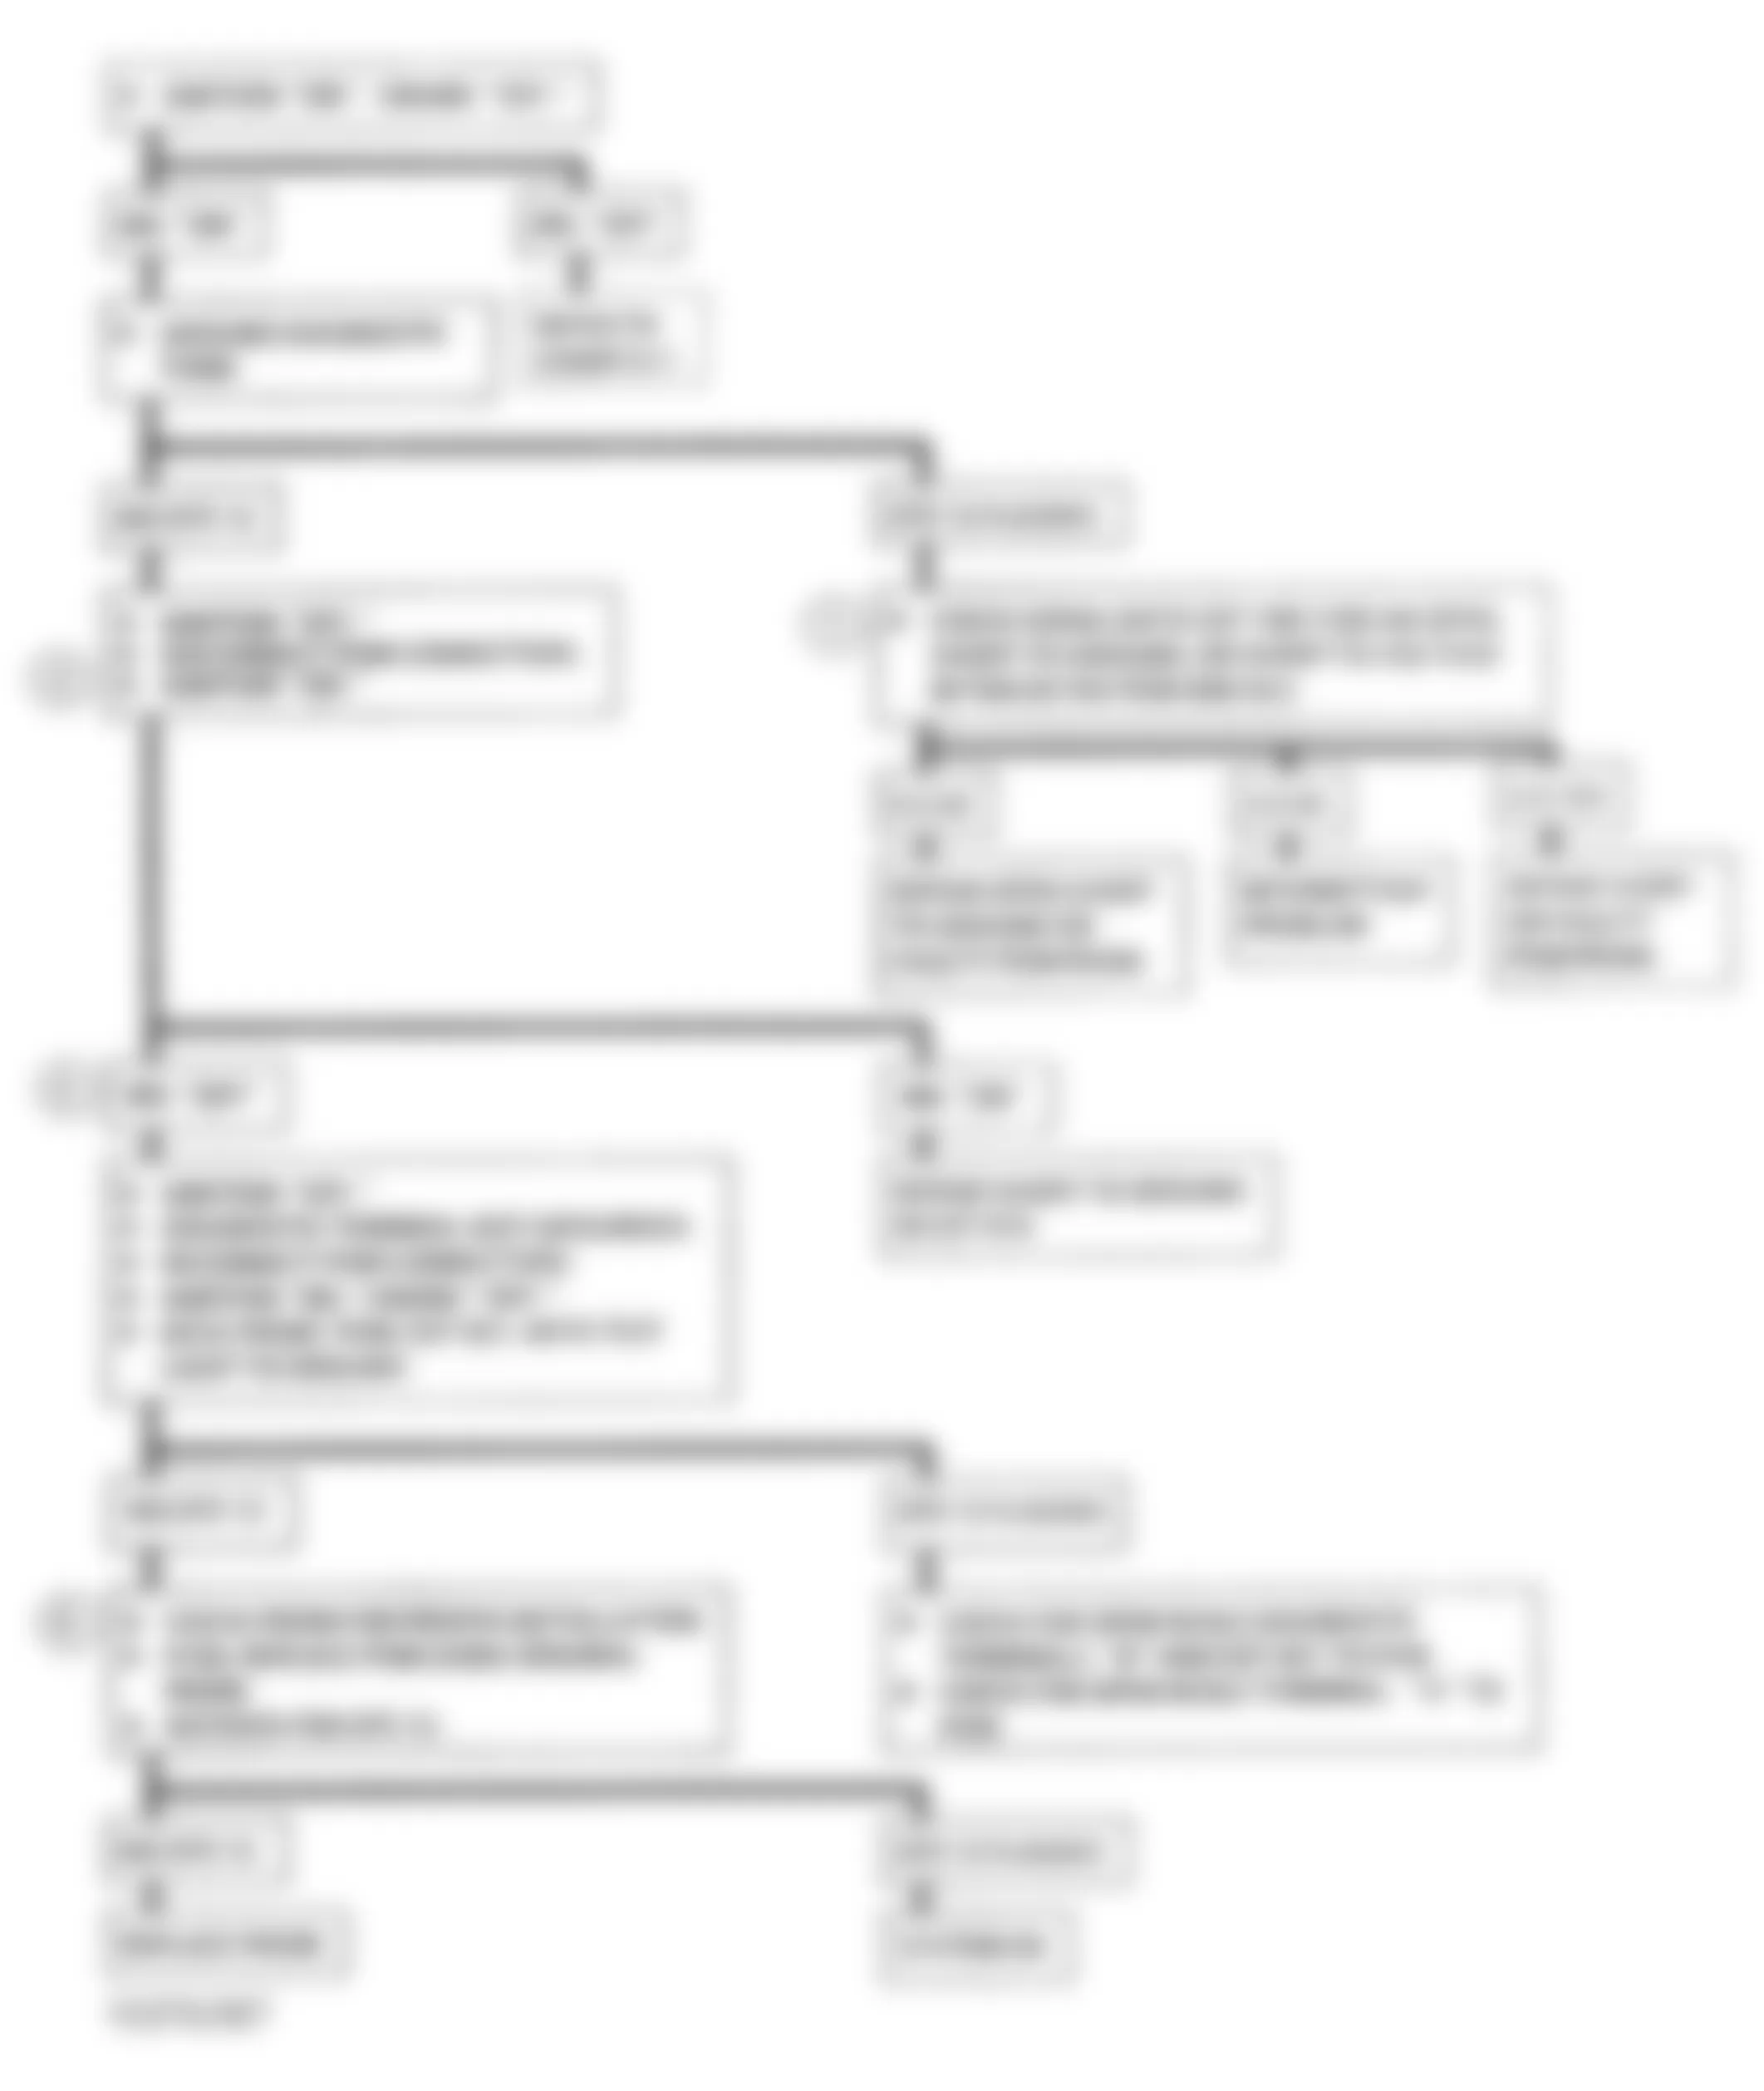 Chevrolet C3500 HD 1993 - Component Locations -  A-2, Flowchart, No DLC Data, MIL On All Time - A/T